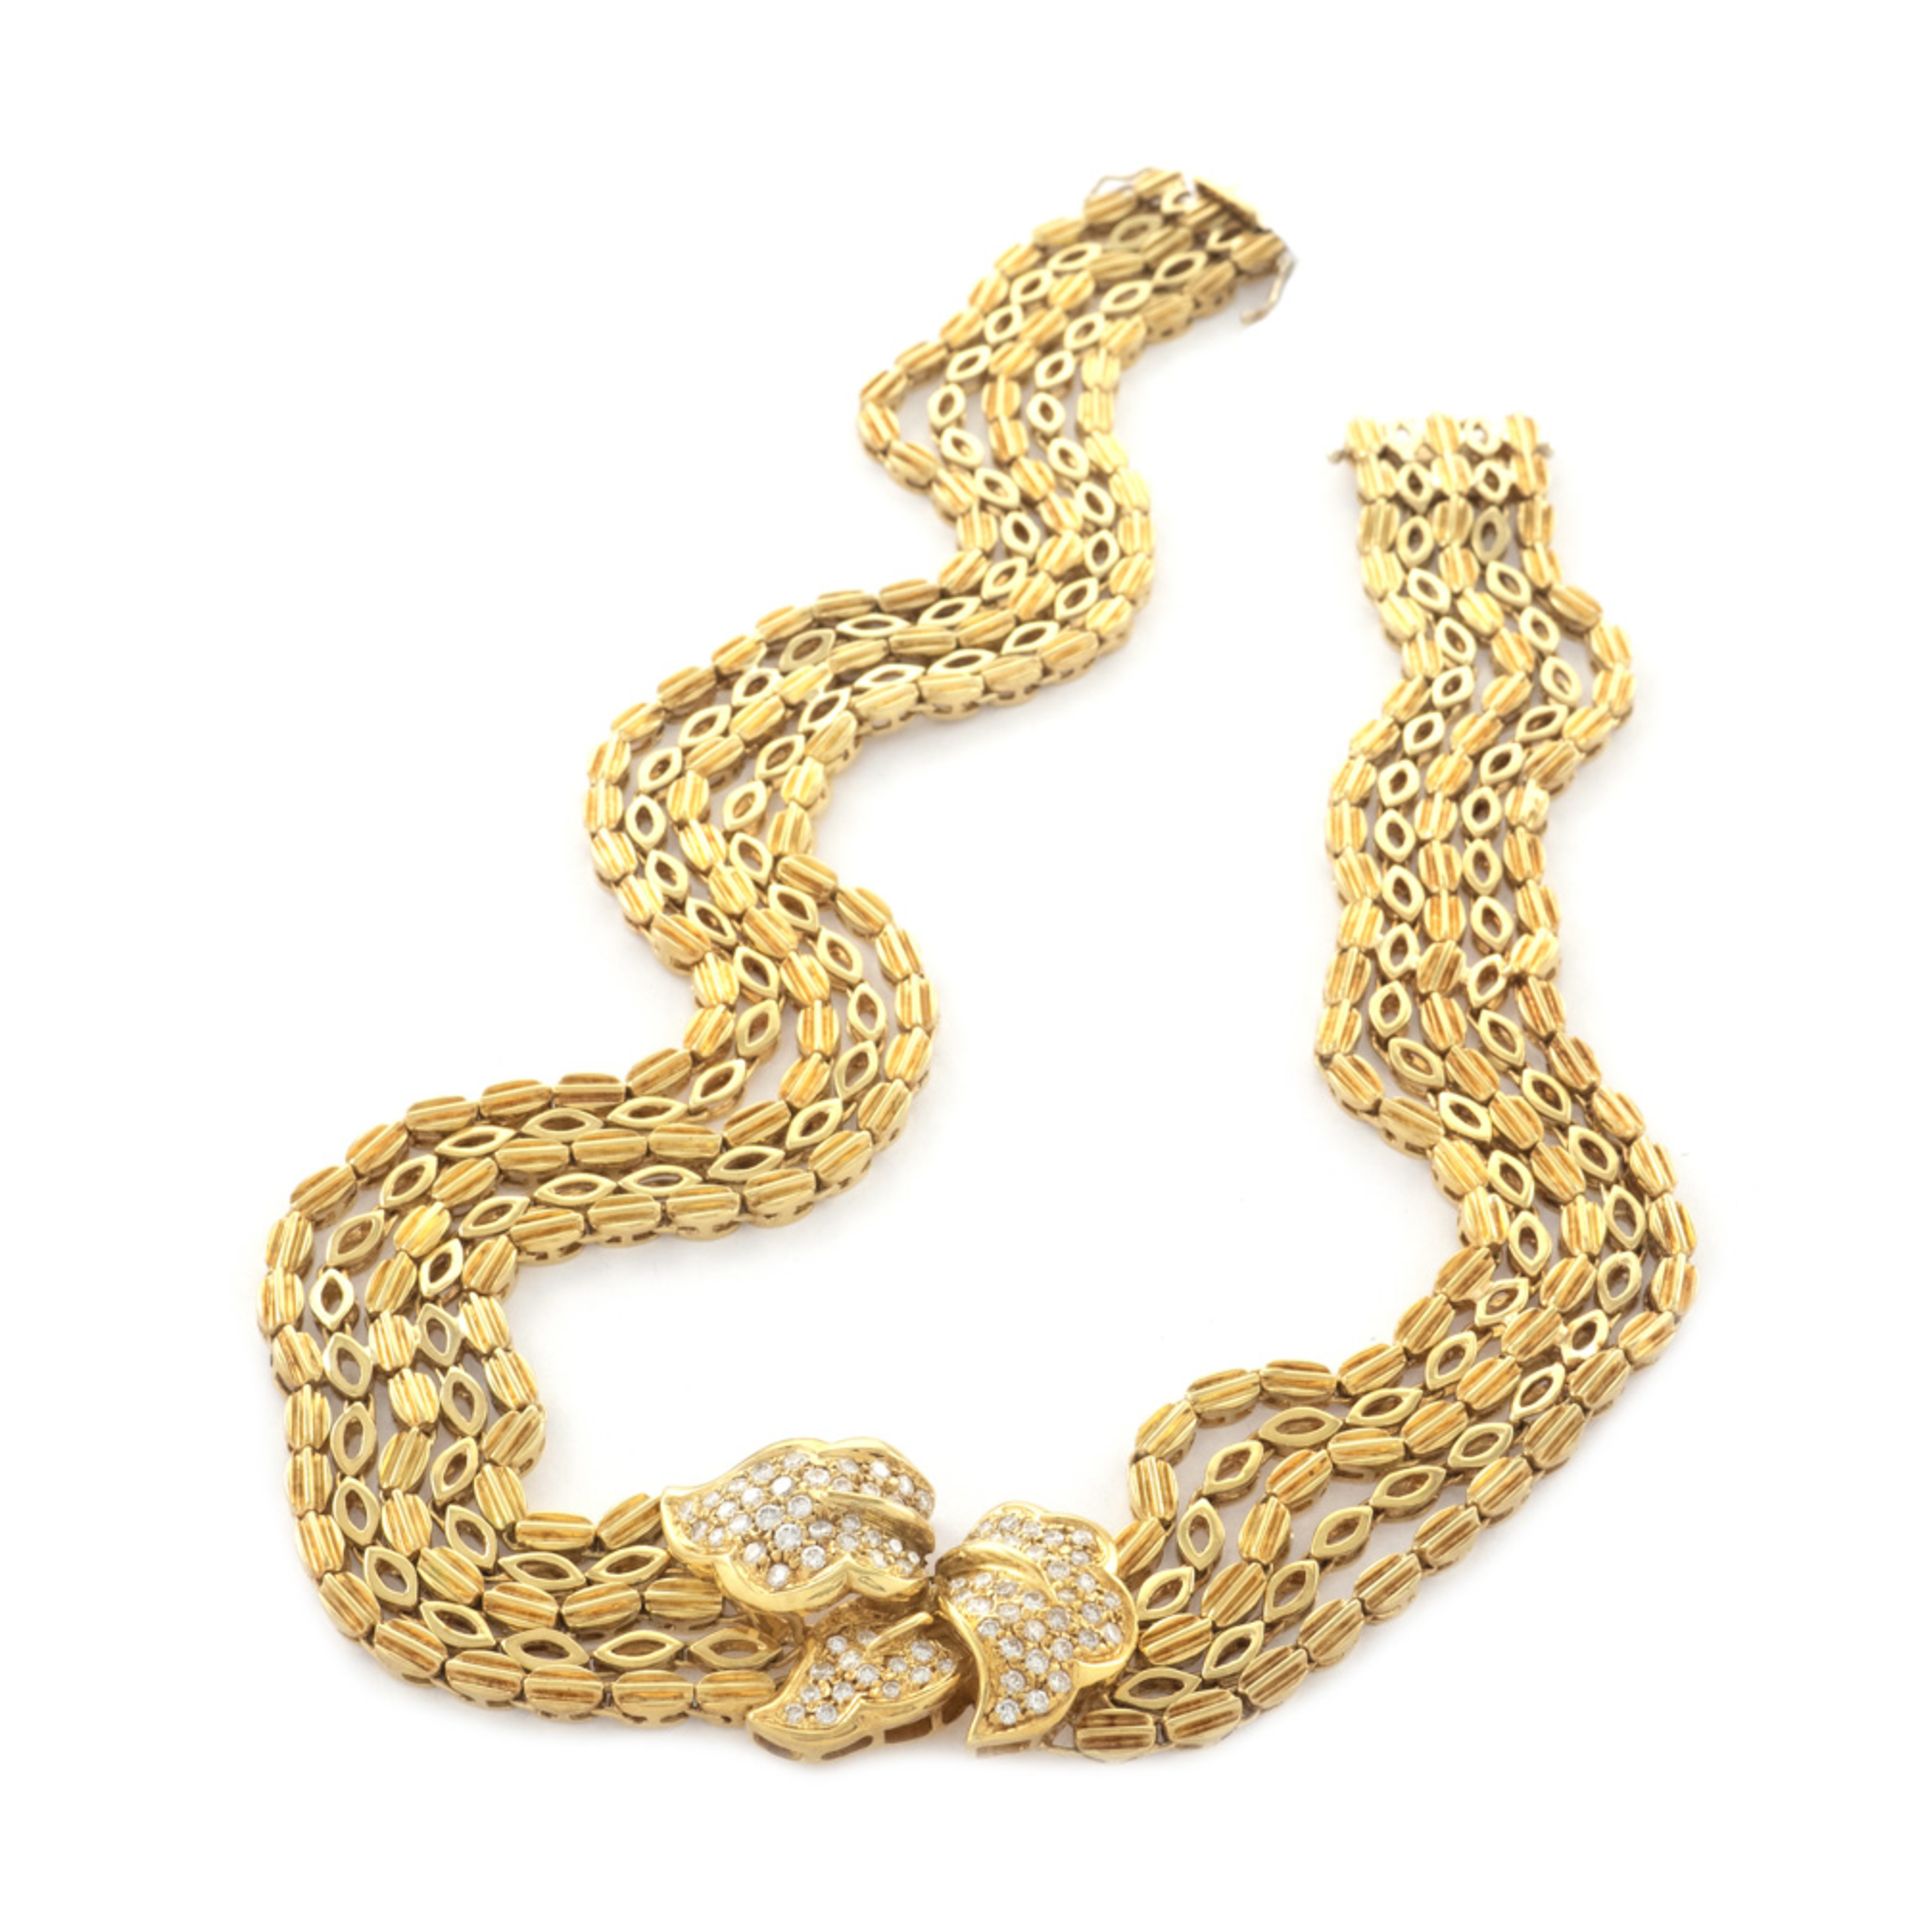 18kt yellow gold and diamonds leaf shaped parure - Image 2 of 6